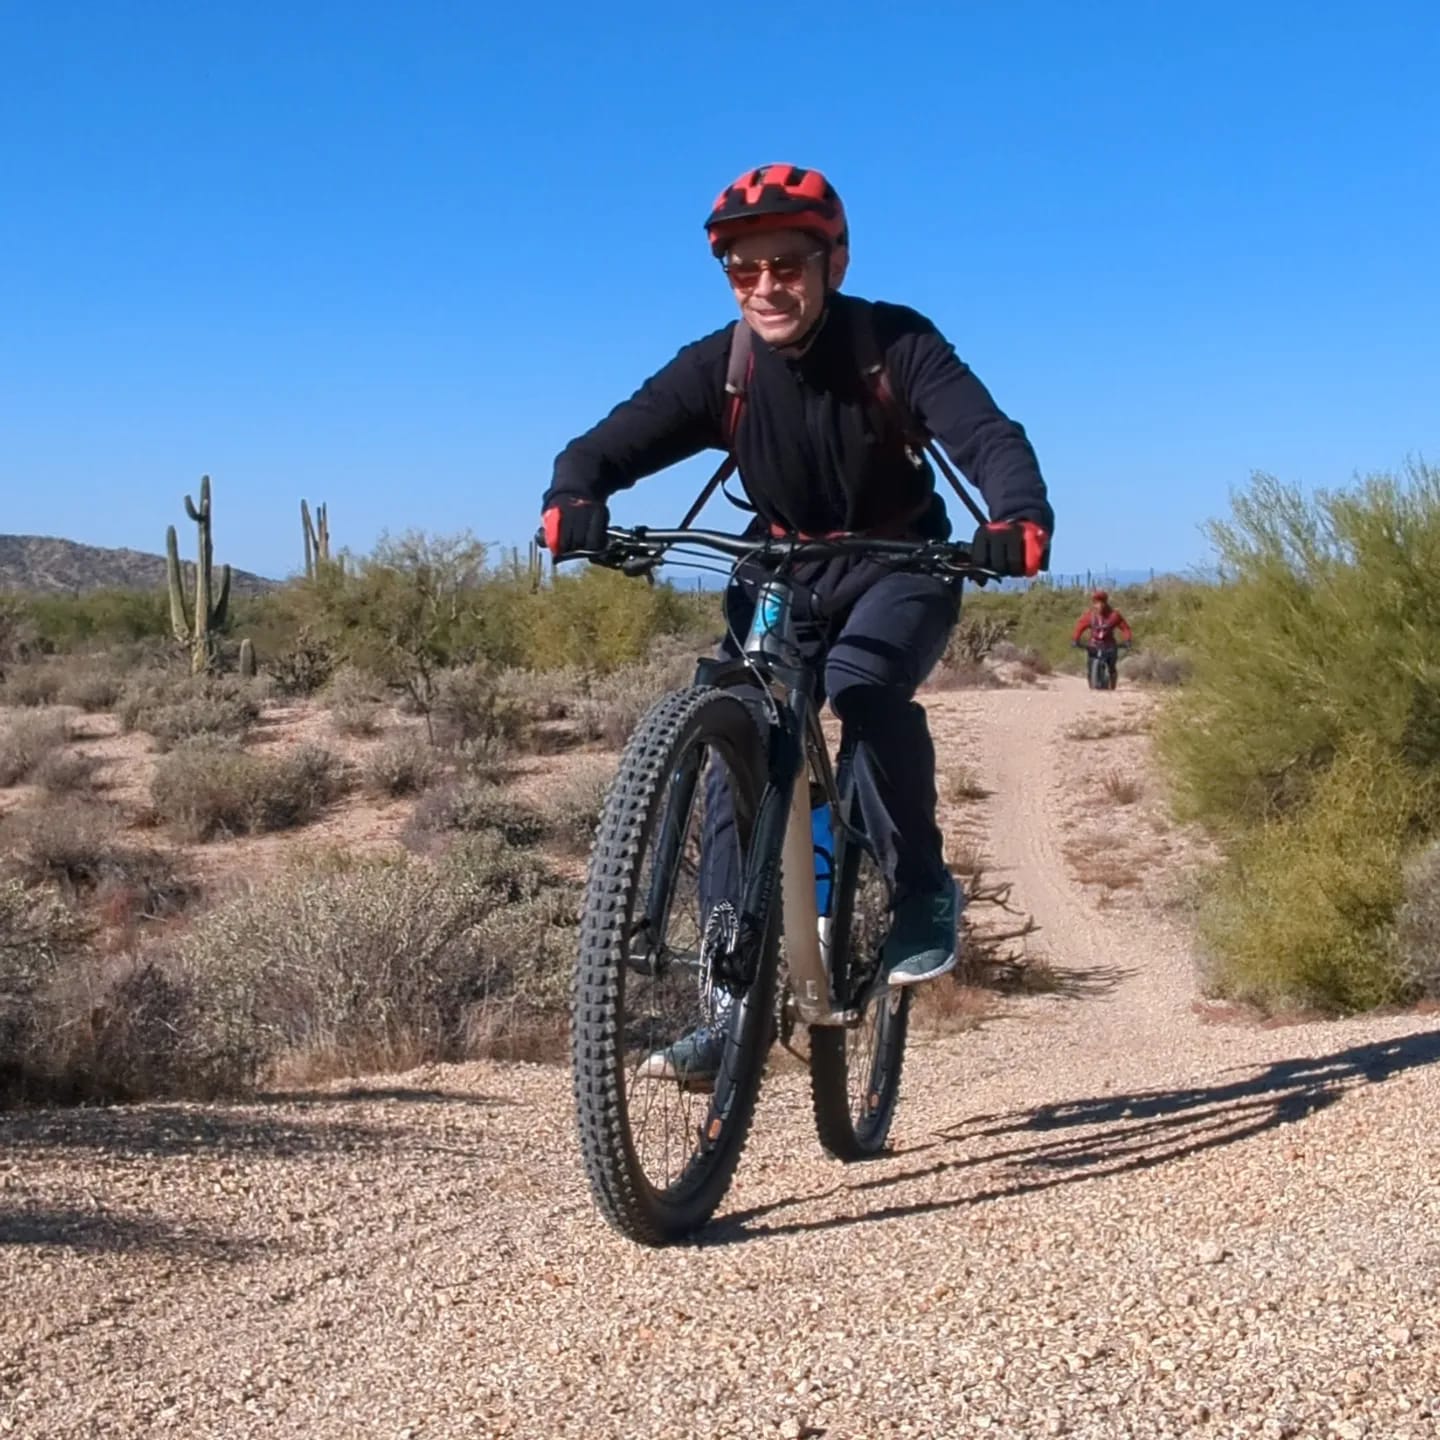 Ted and Marcel tear up the trail during their Phoenix mountain bike tour with the Wild Bunch.